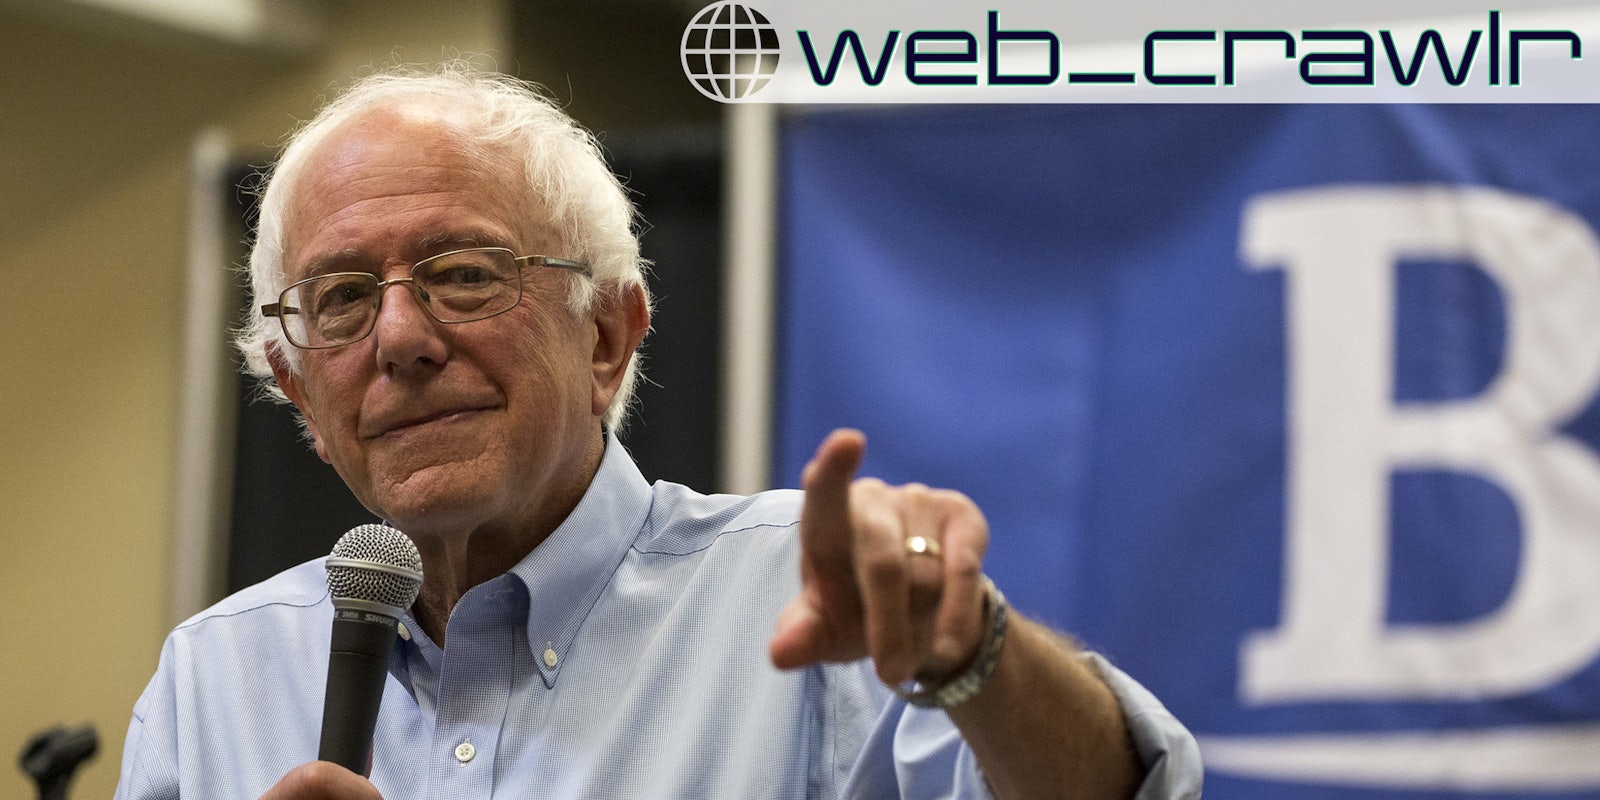 Sen. Bernie Sanders pointing. The Daily Dot newsletter web_crawlr logo is in the top right corner.